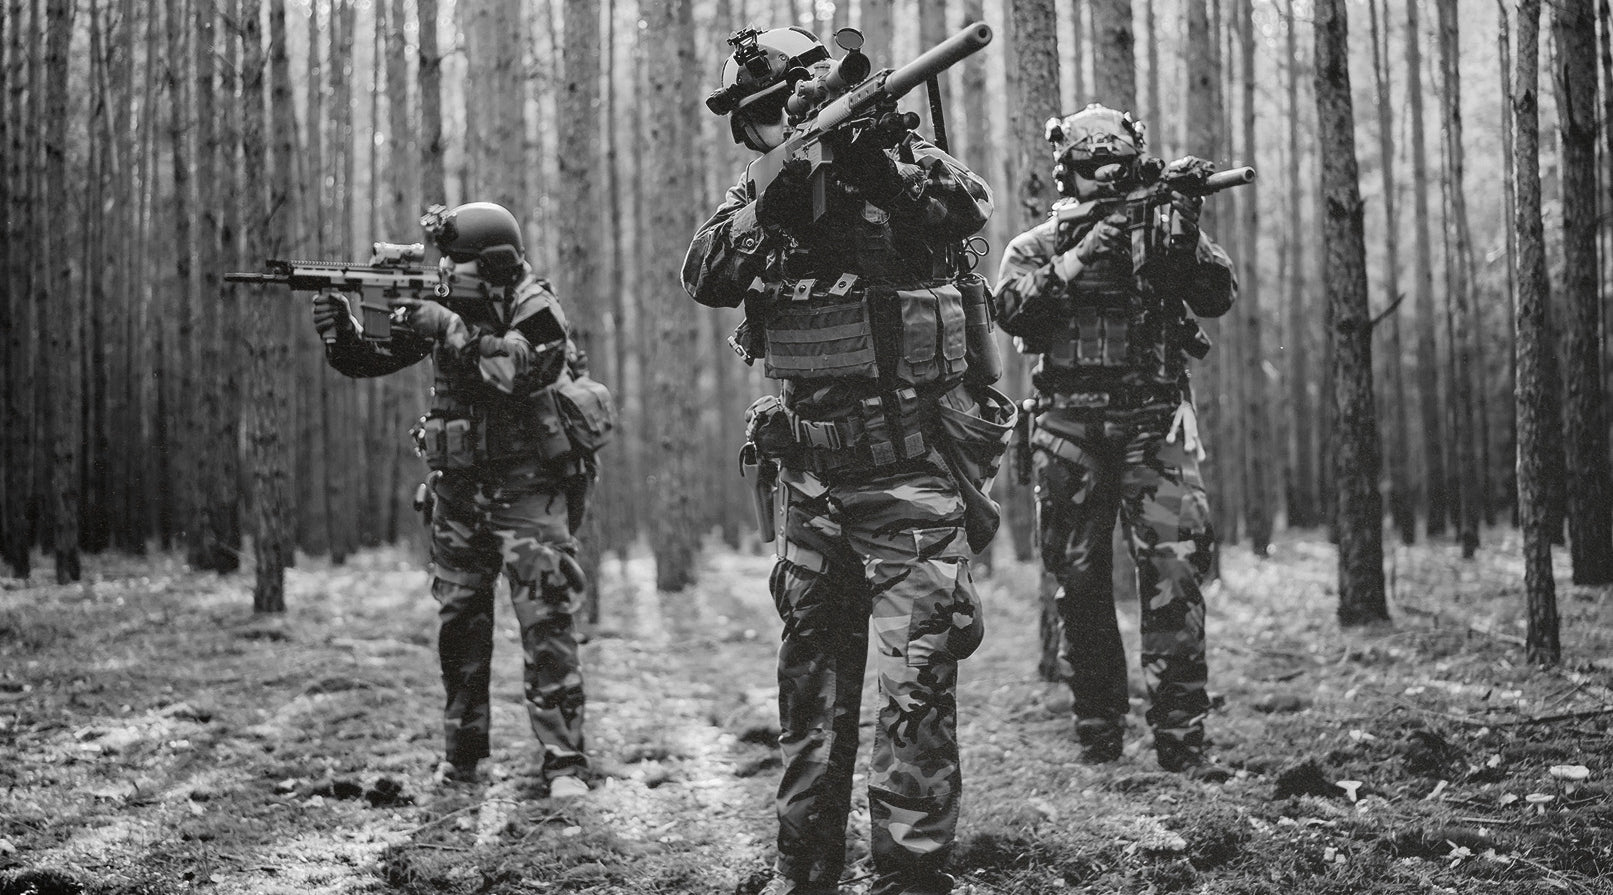 Military Infantry Walking Through the Forest